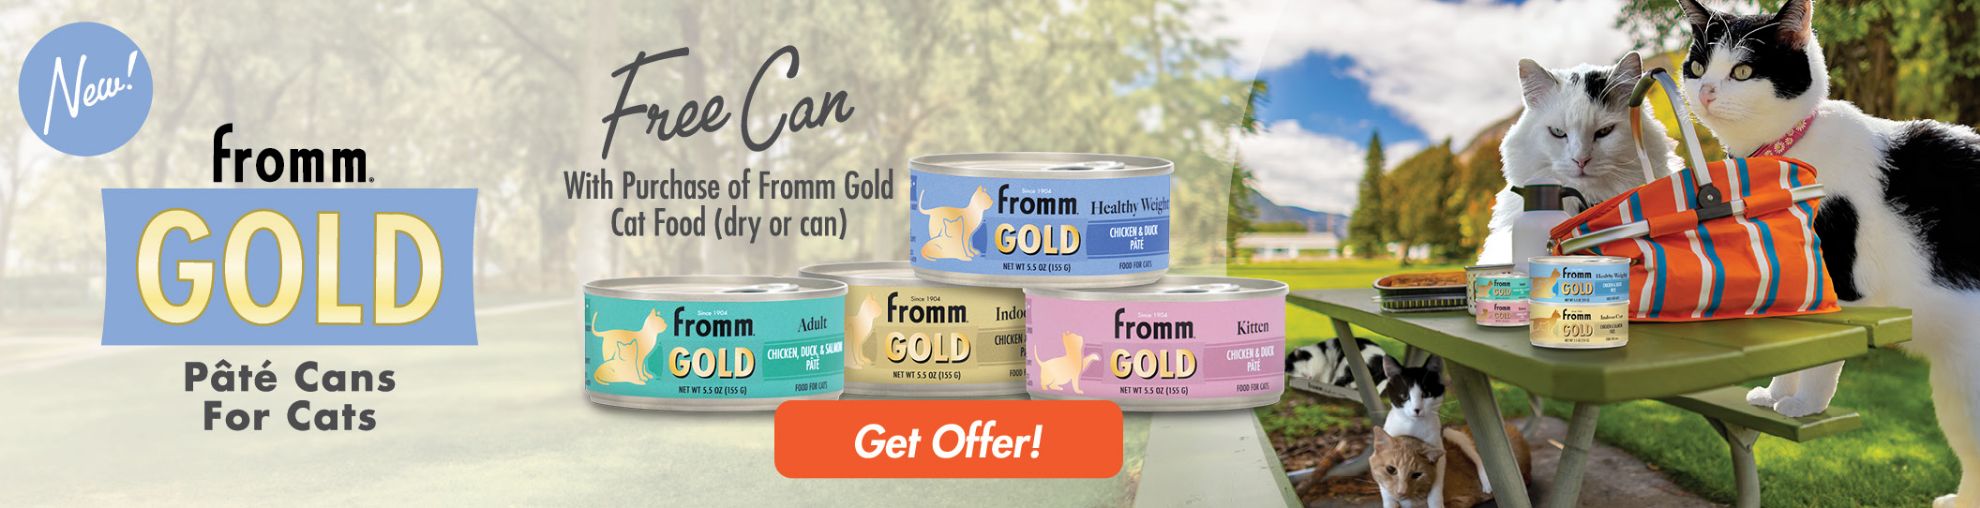 OFFER F2871 Gold Cat Free Can